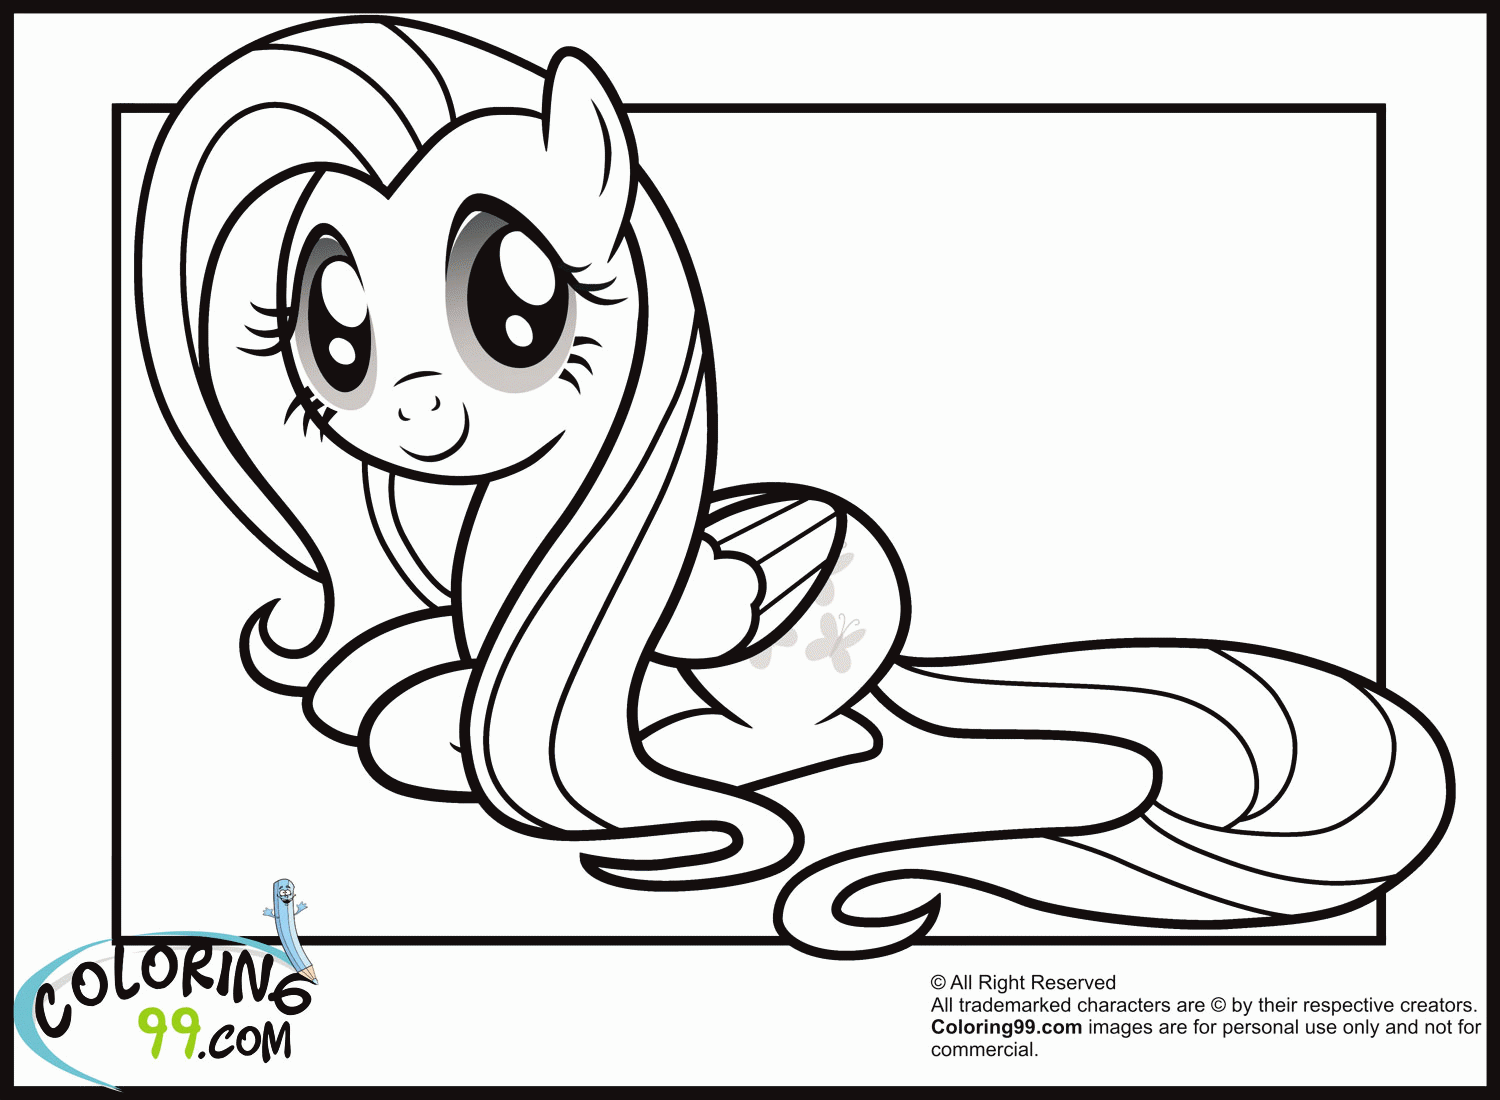 My Little Pony Fluttershy Coloring Pages | Minister Coloring